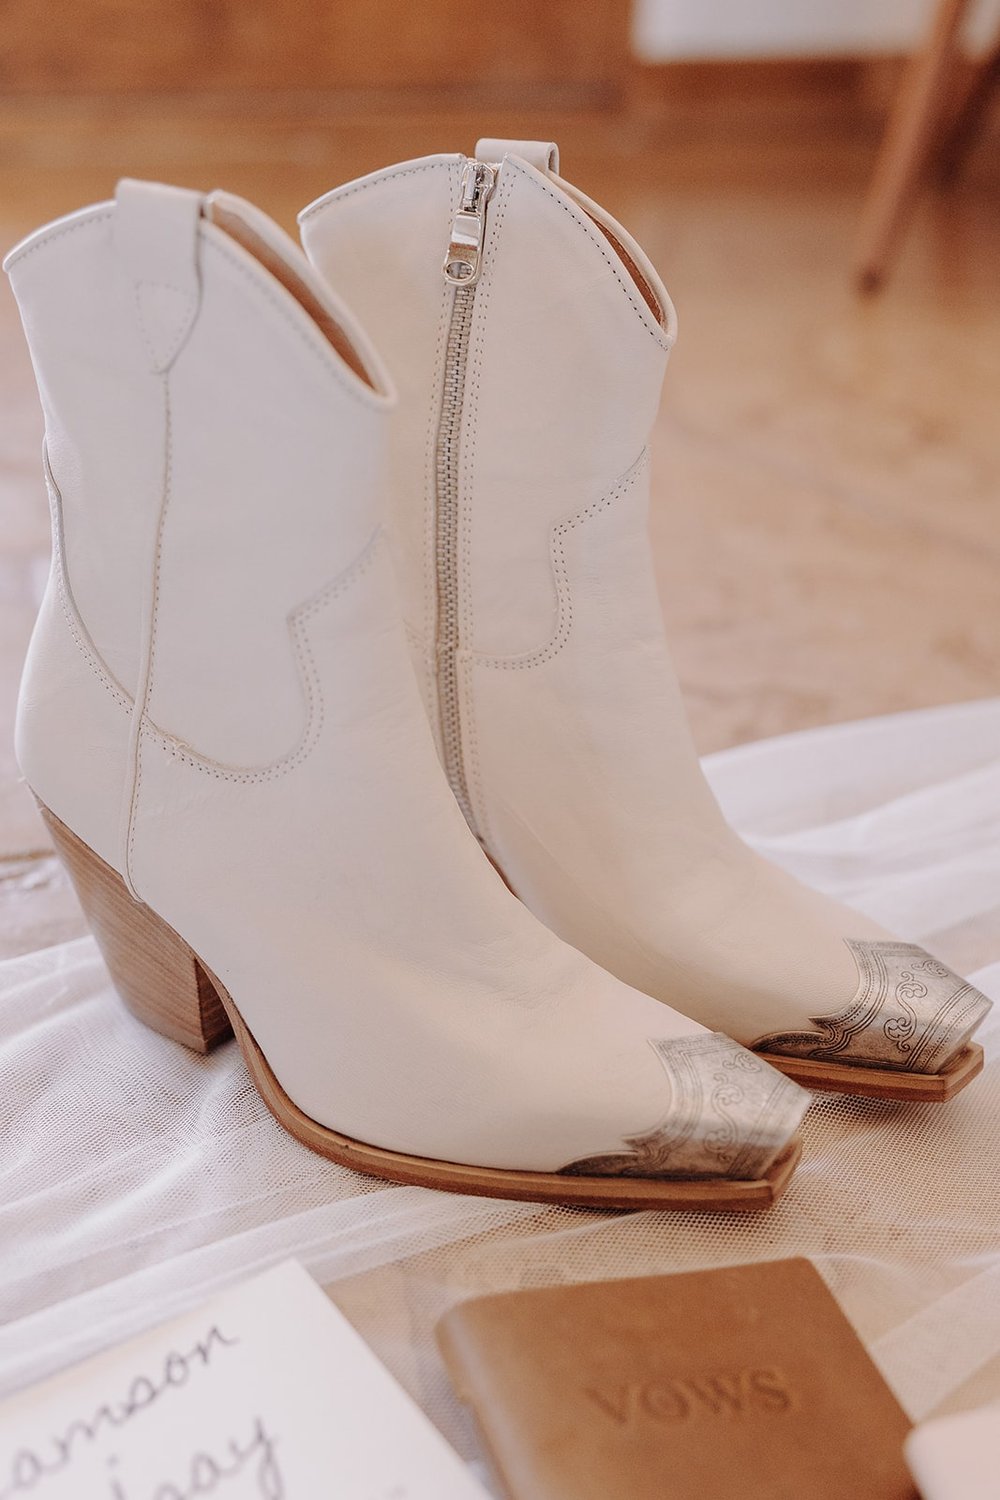 White cowgirl boots at Joshua Tree wedding